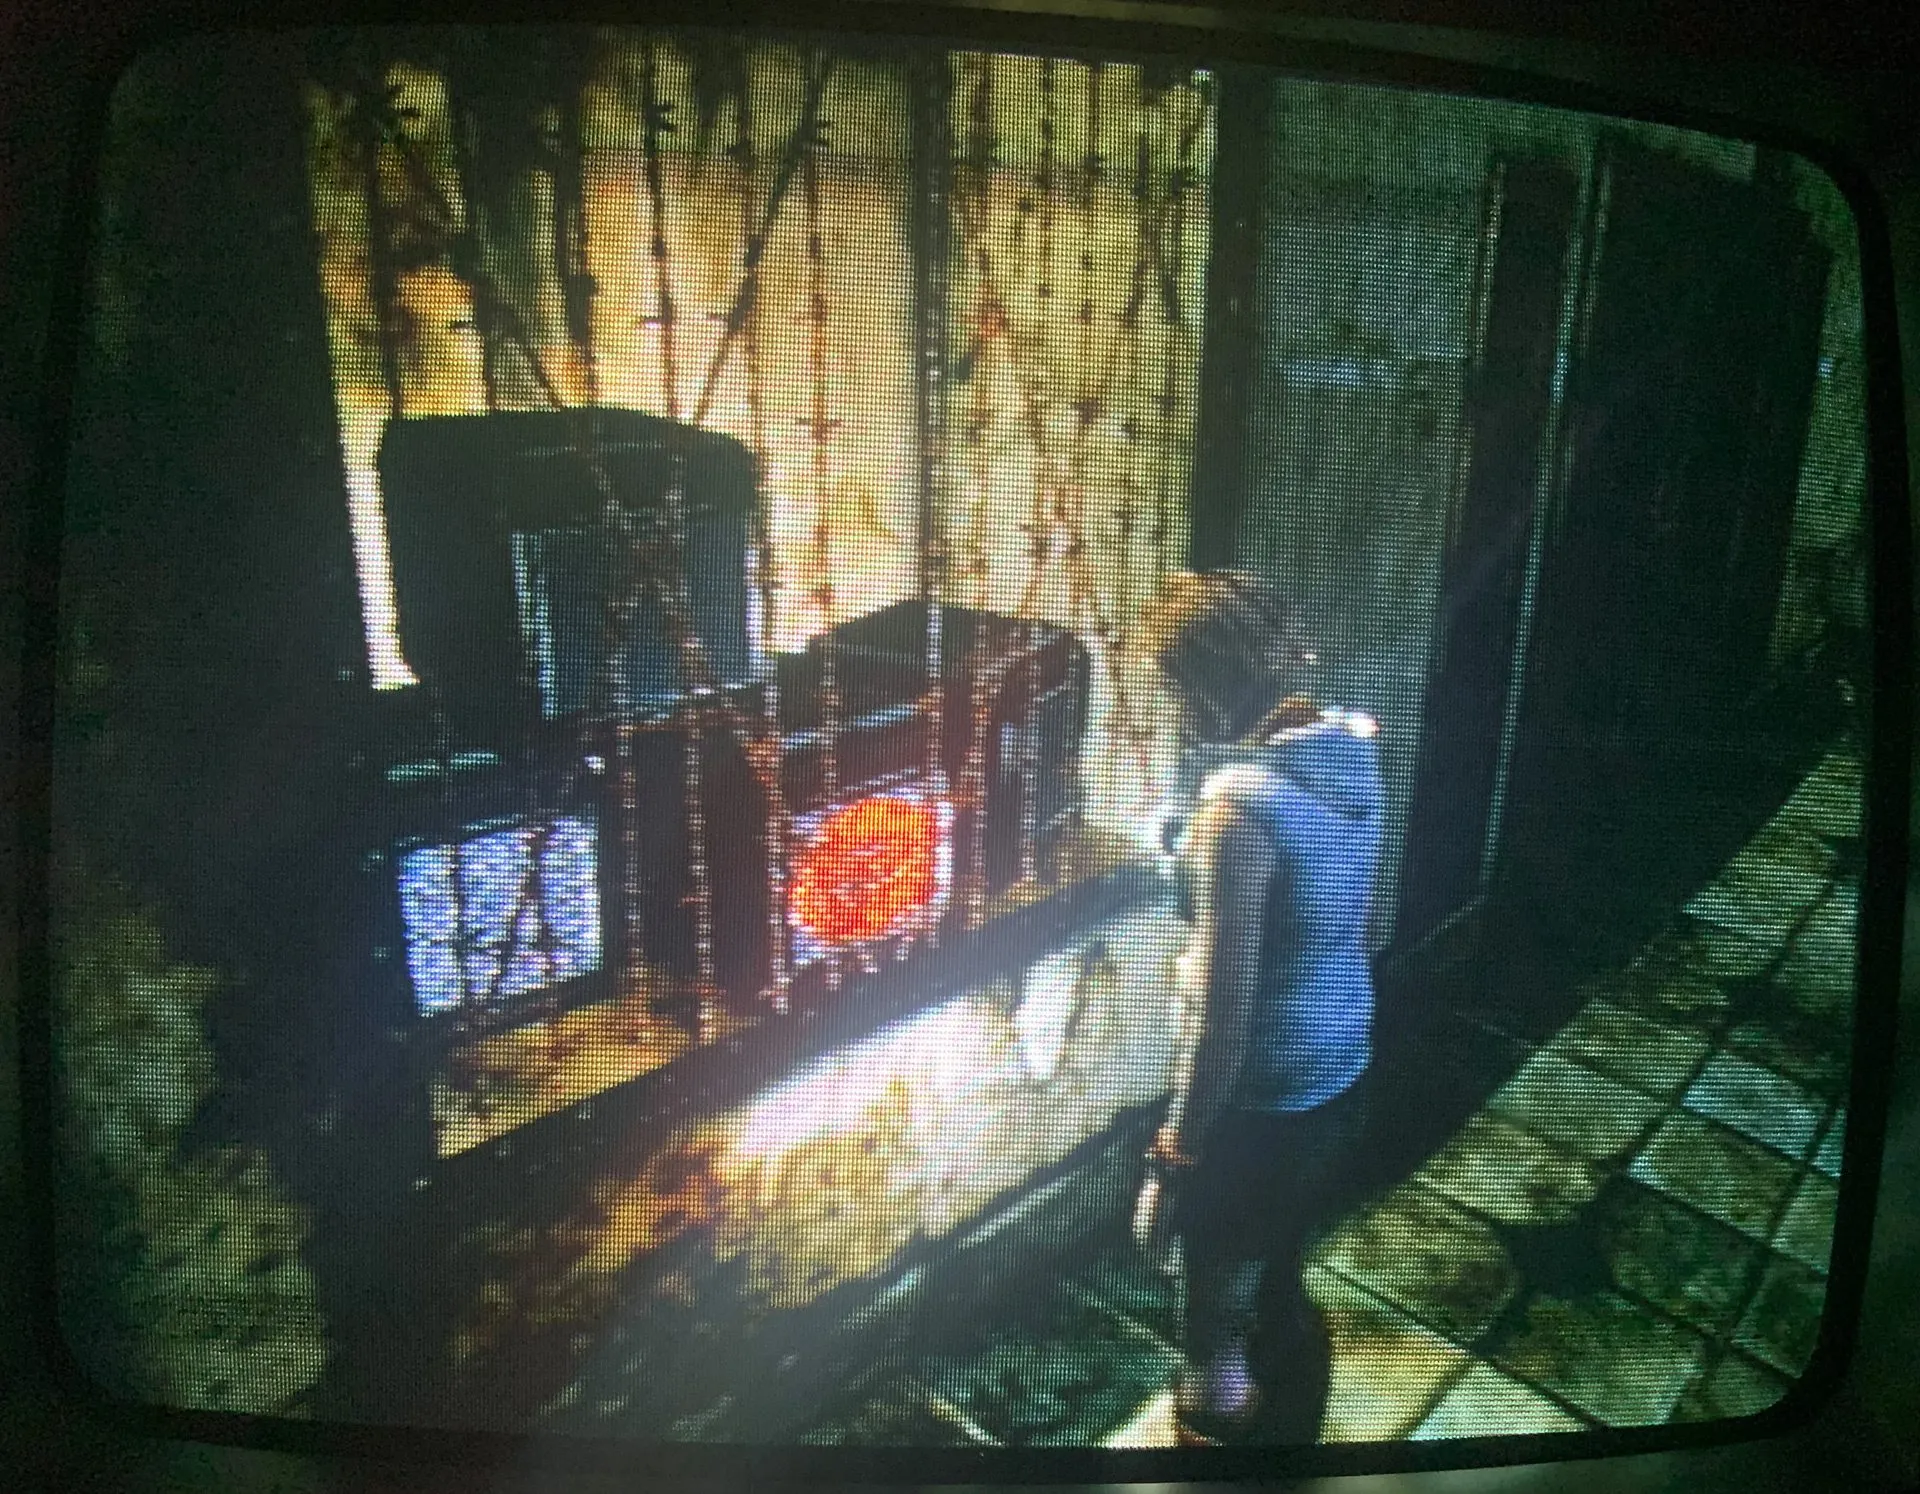 Silent Hill played on a CRT